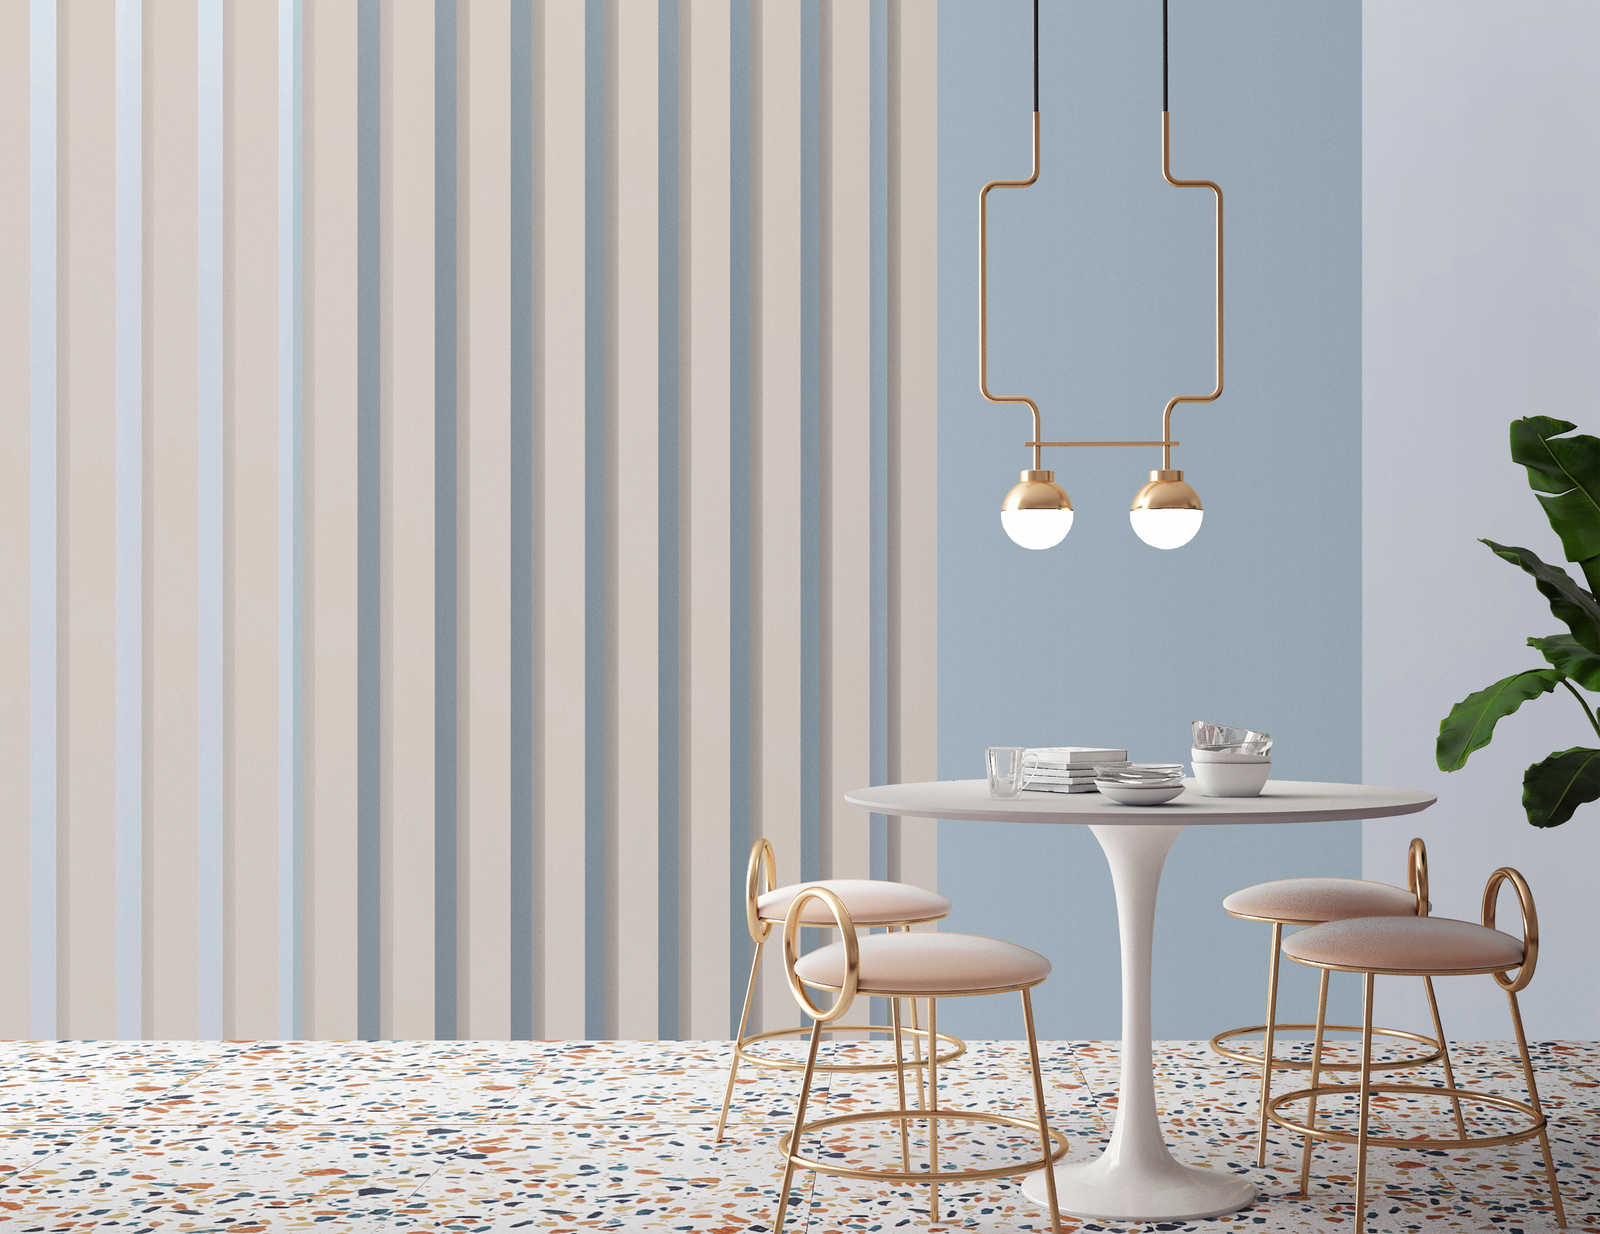             Illusion Room 2 - wall mural 3D stripes design in blue & grey
        